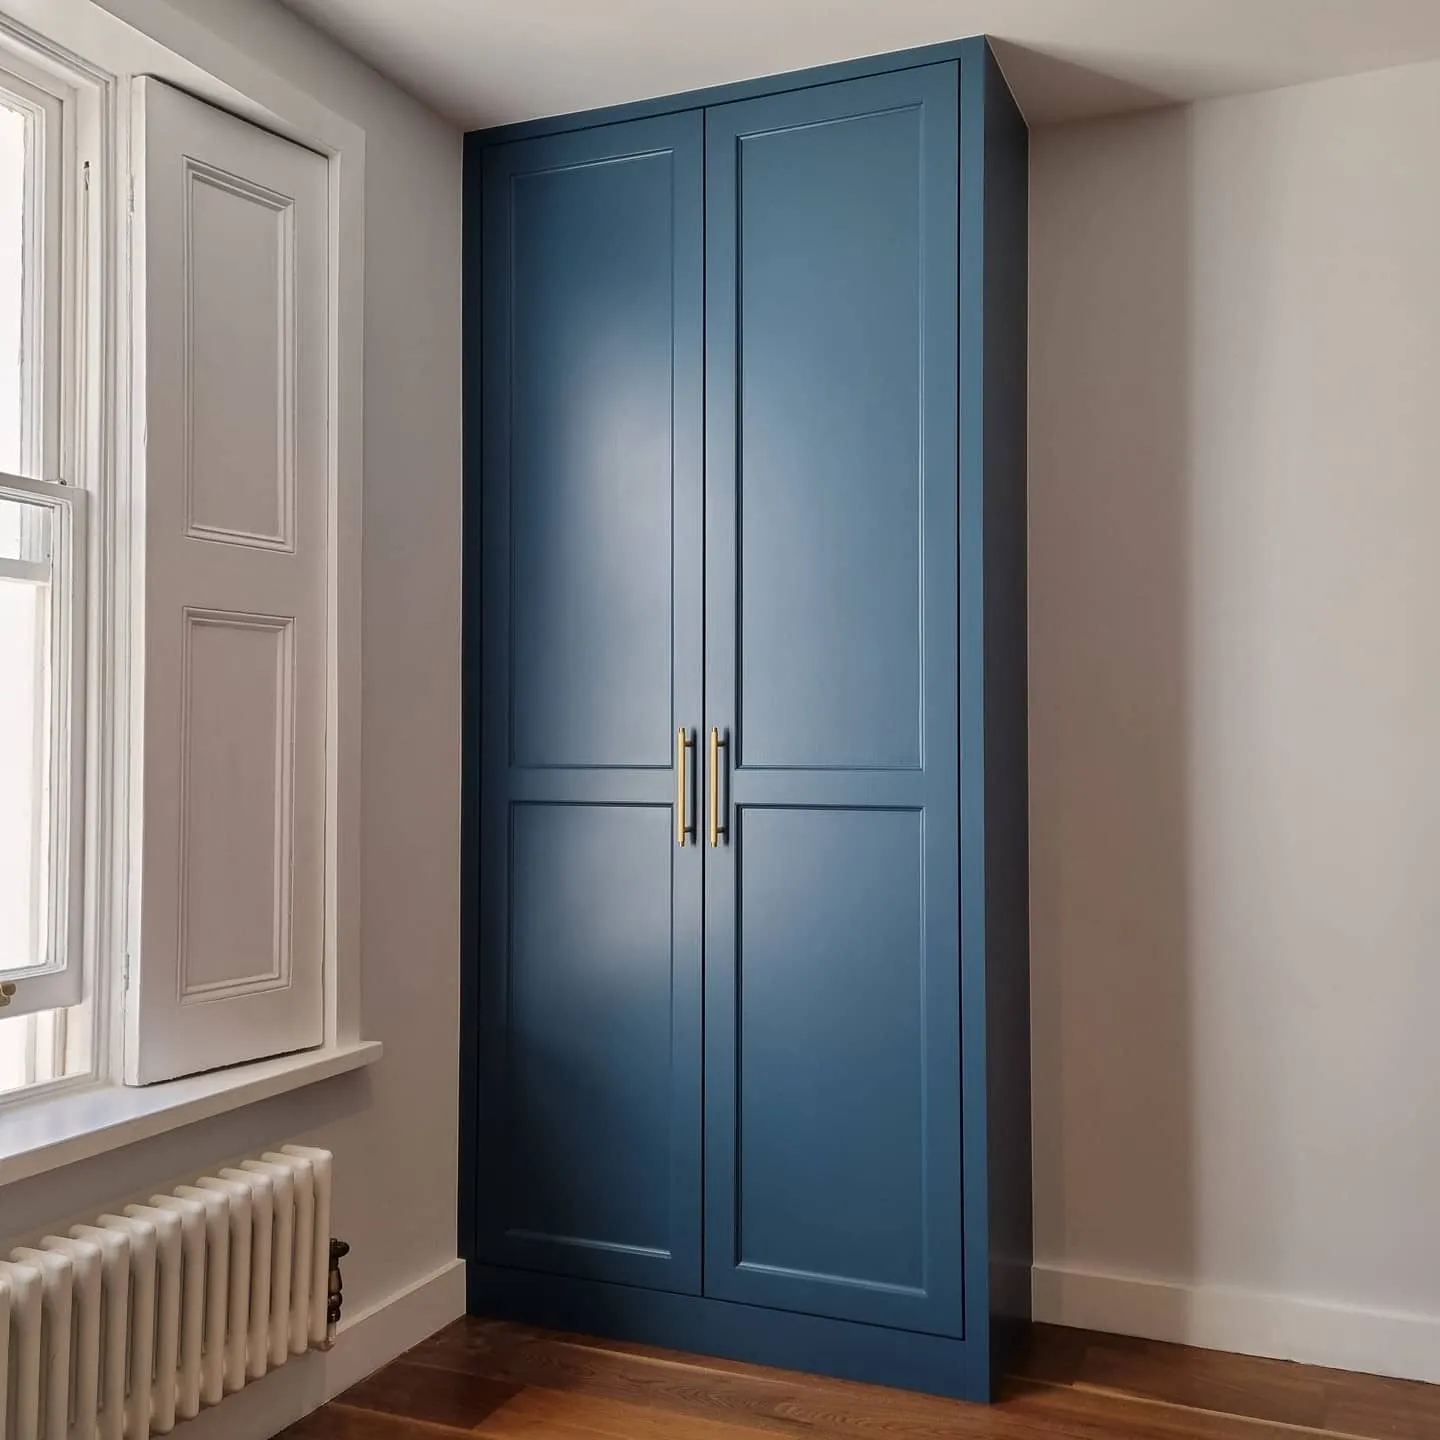 Dulux Heritage Midnight Teal wardrobe cabinet color